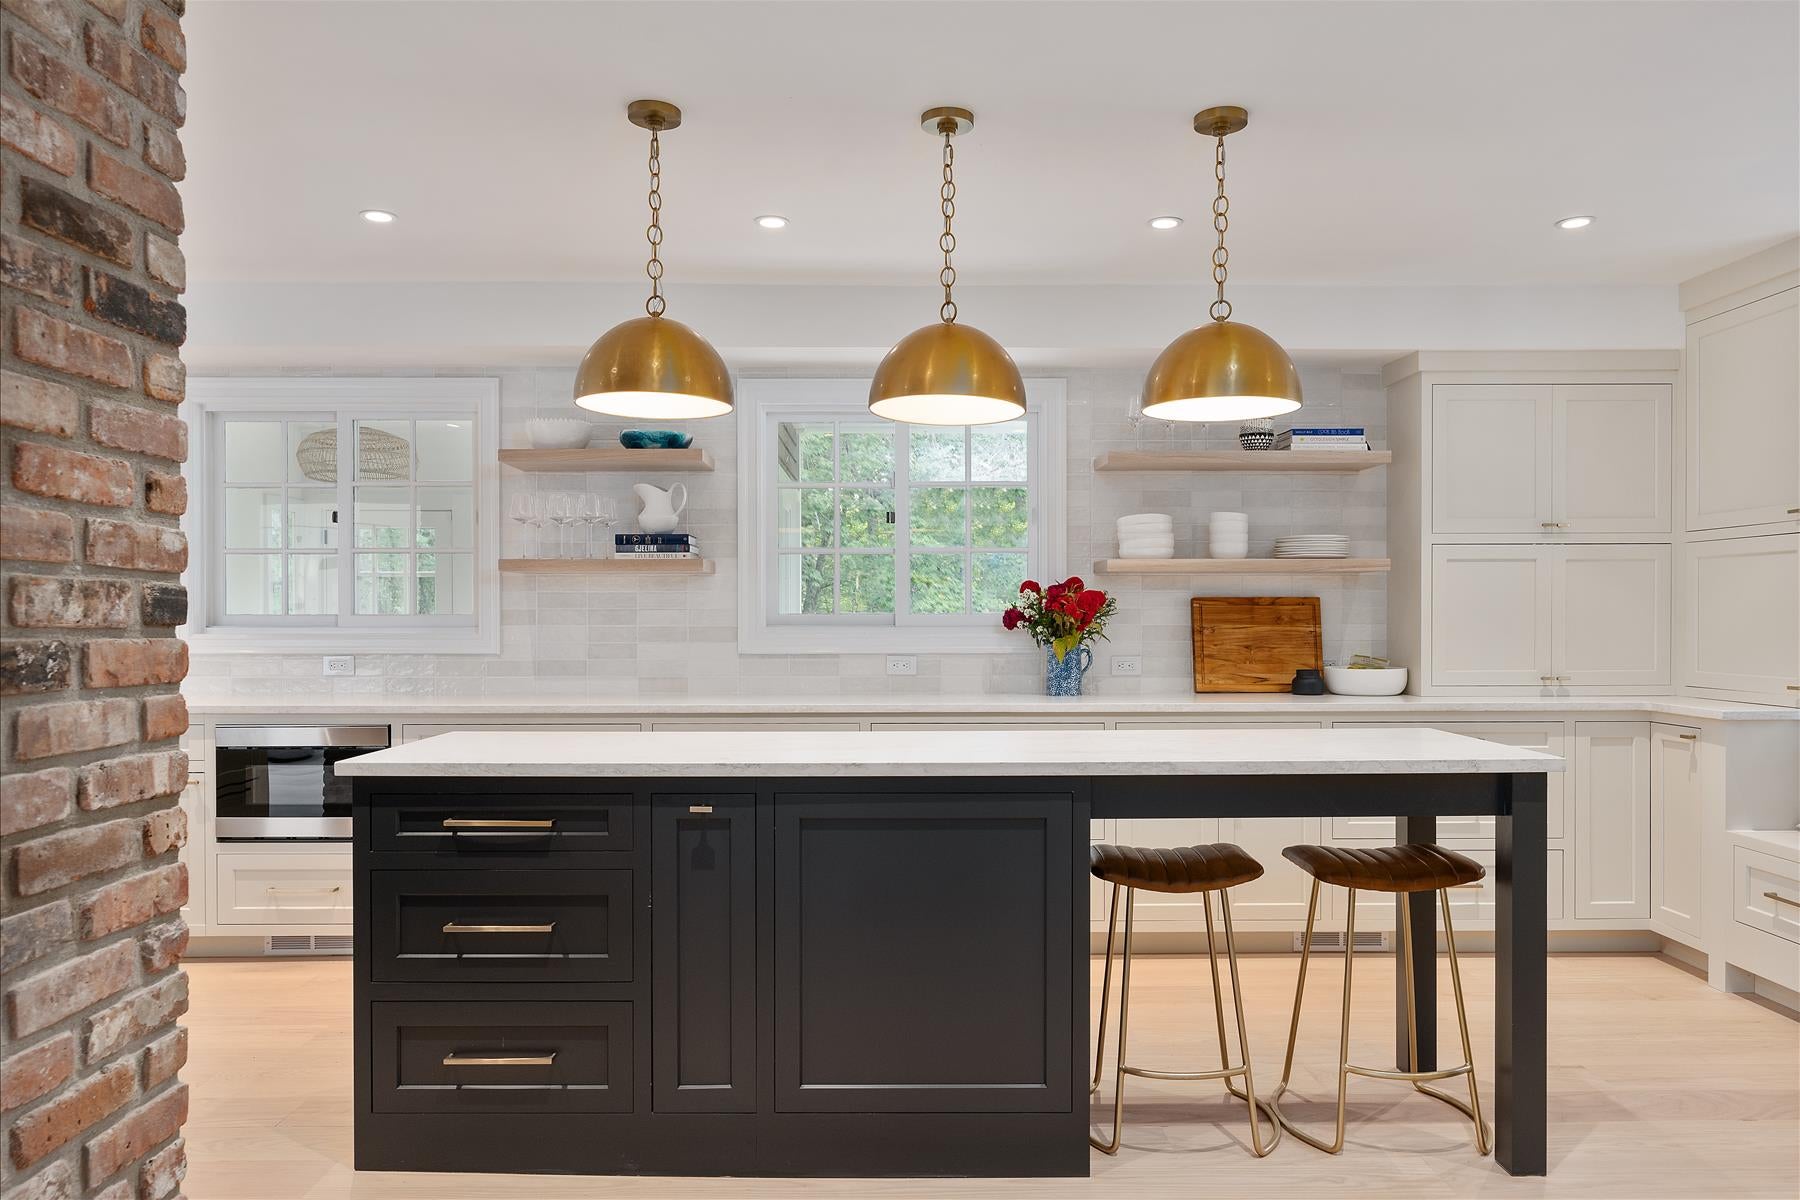 Kitchen Island with Seating. Gold Pendant Lights. Black Inset Cabinets. Shaker Style. 